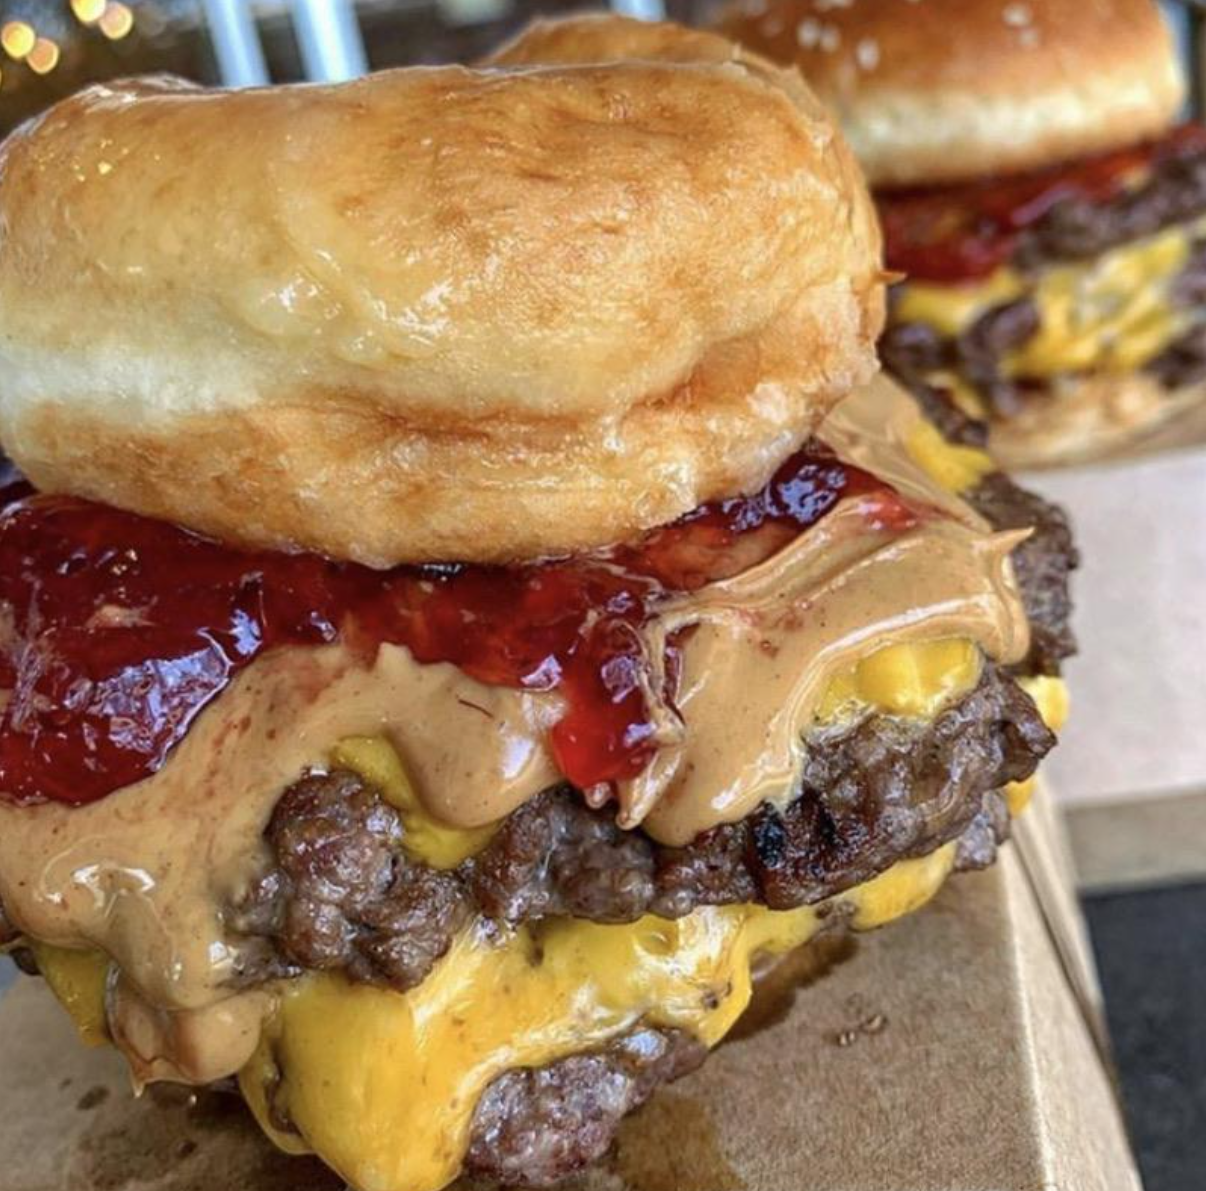 Peanut butter and jelly on a burger.